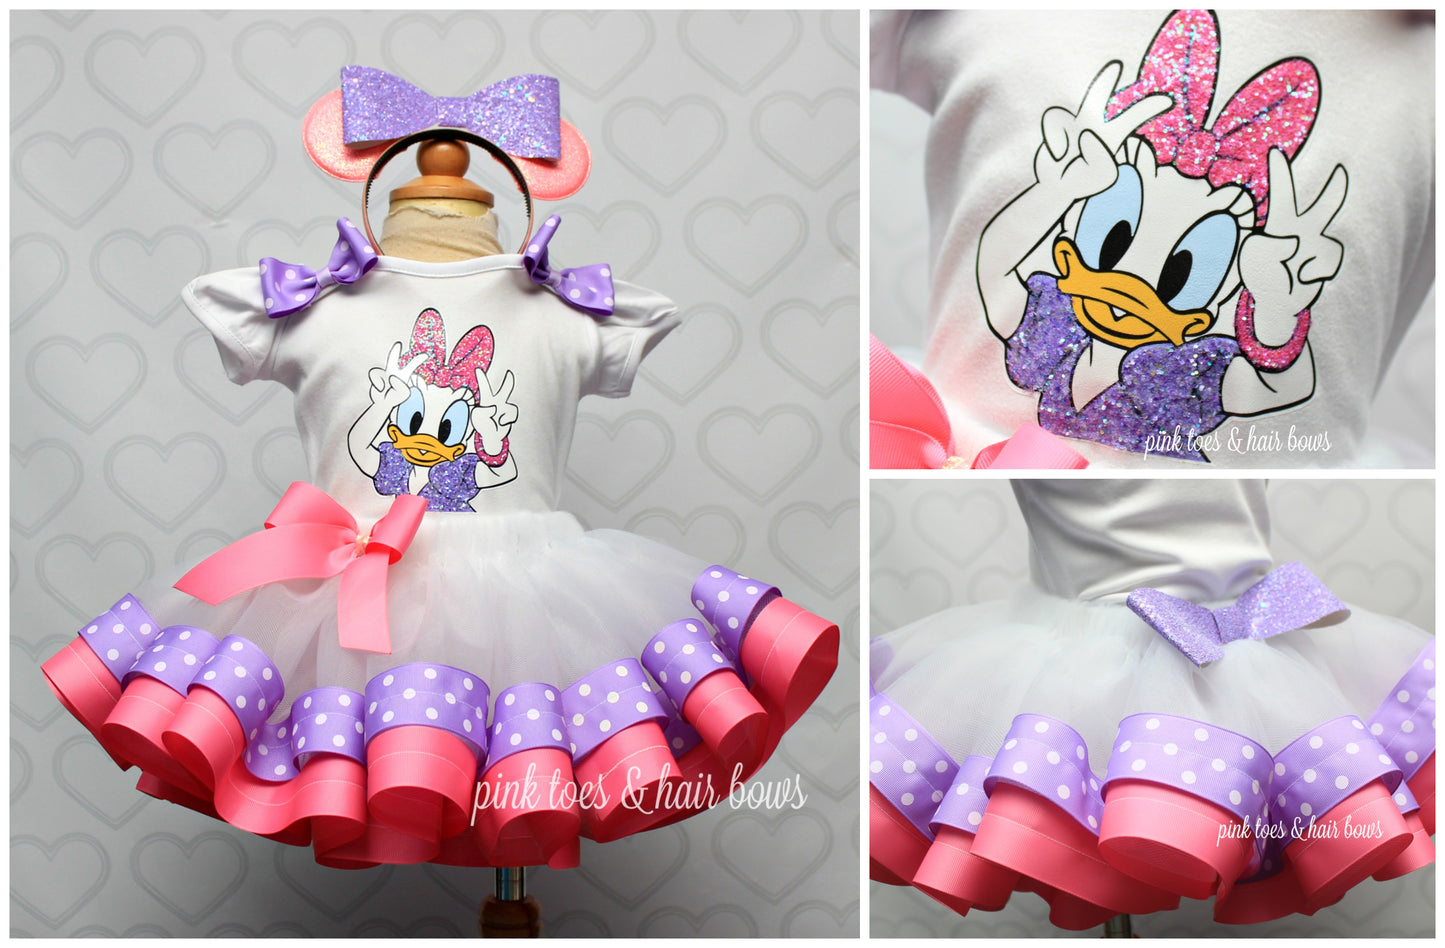 Duck Tutu set- Duck outfit-Duck birthday outfit- duck tutu